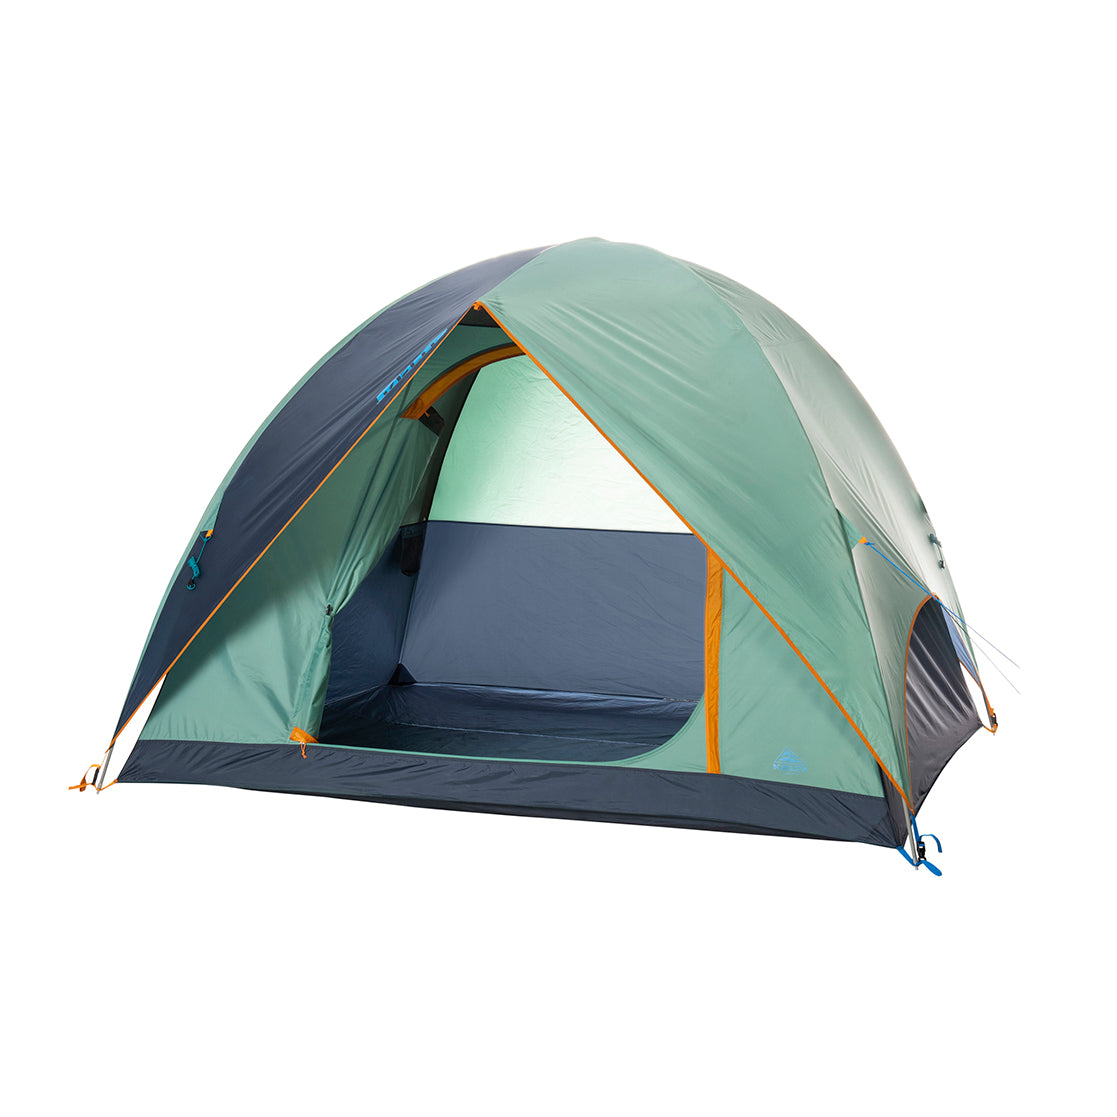 kelty tallboy 4 person tent with fly on and door open in color light teal with orange accents